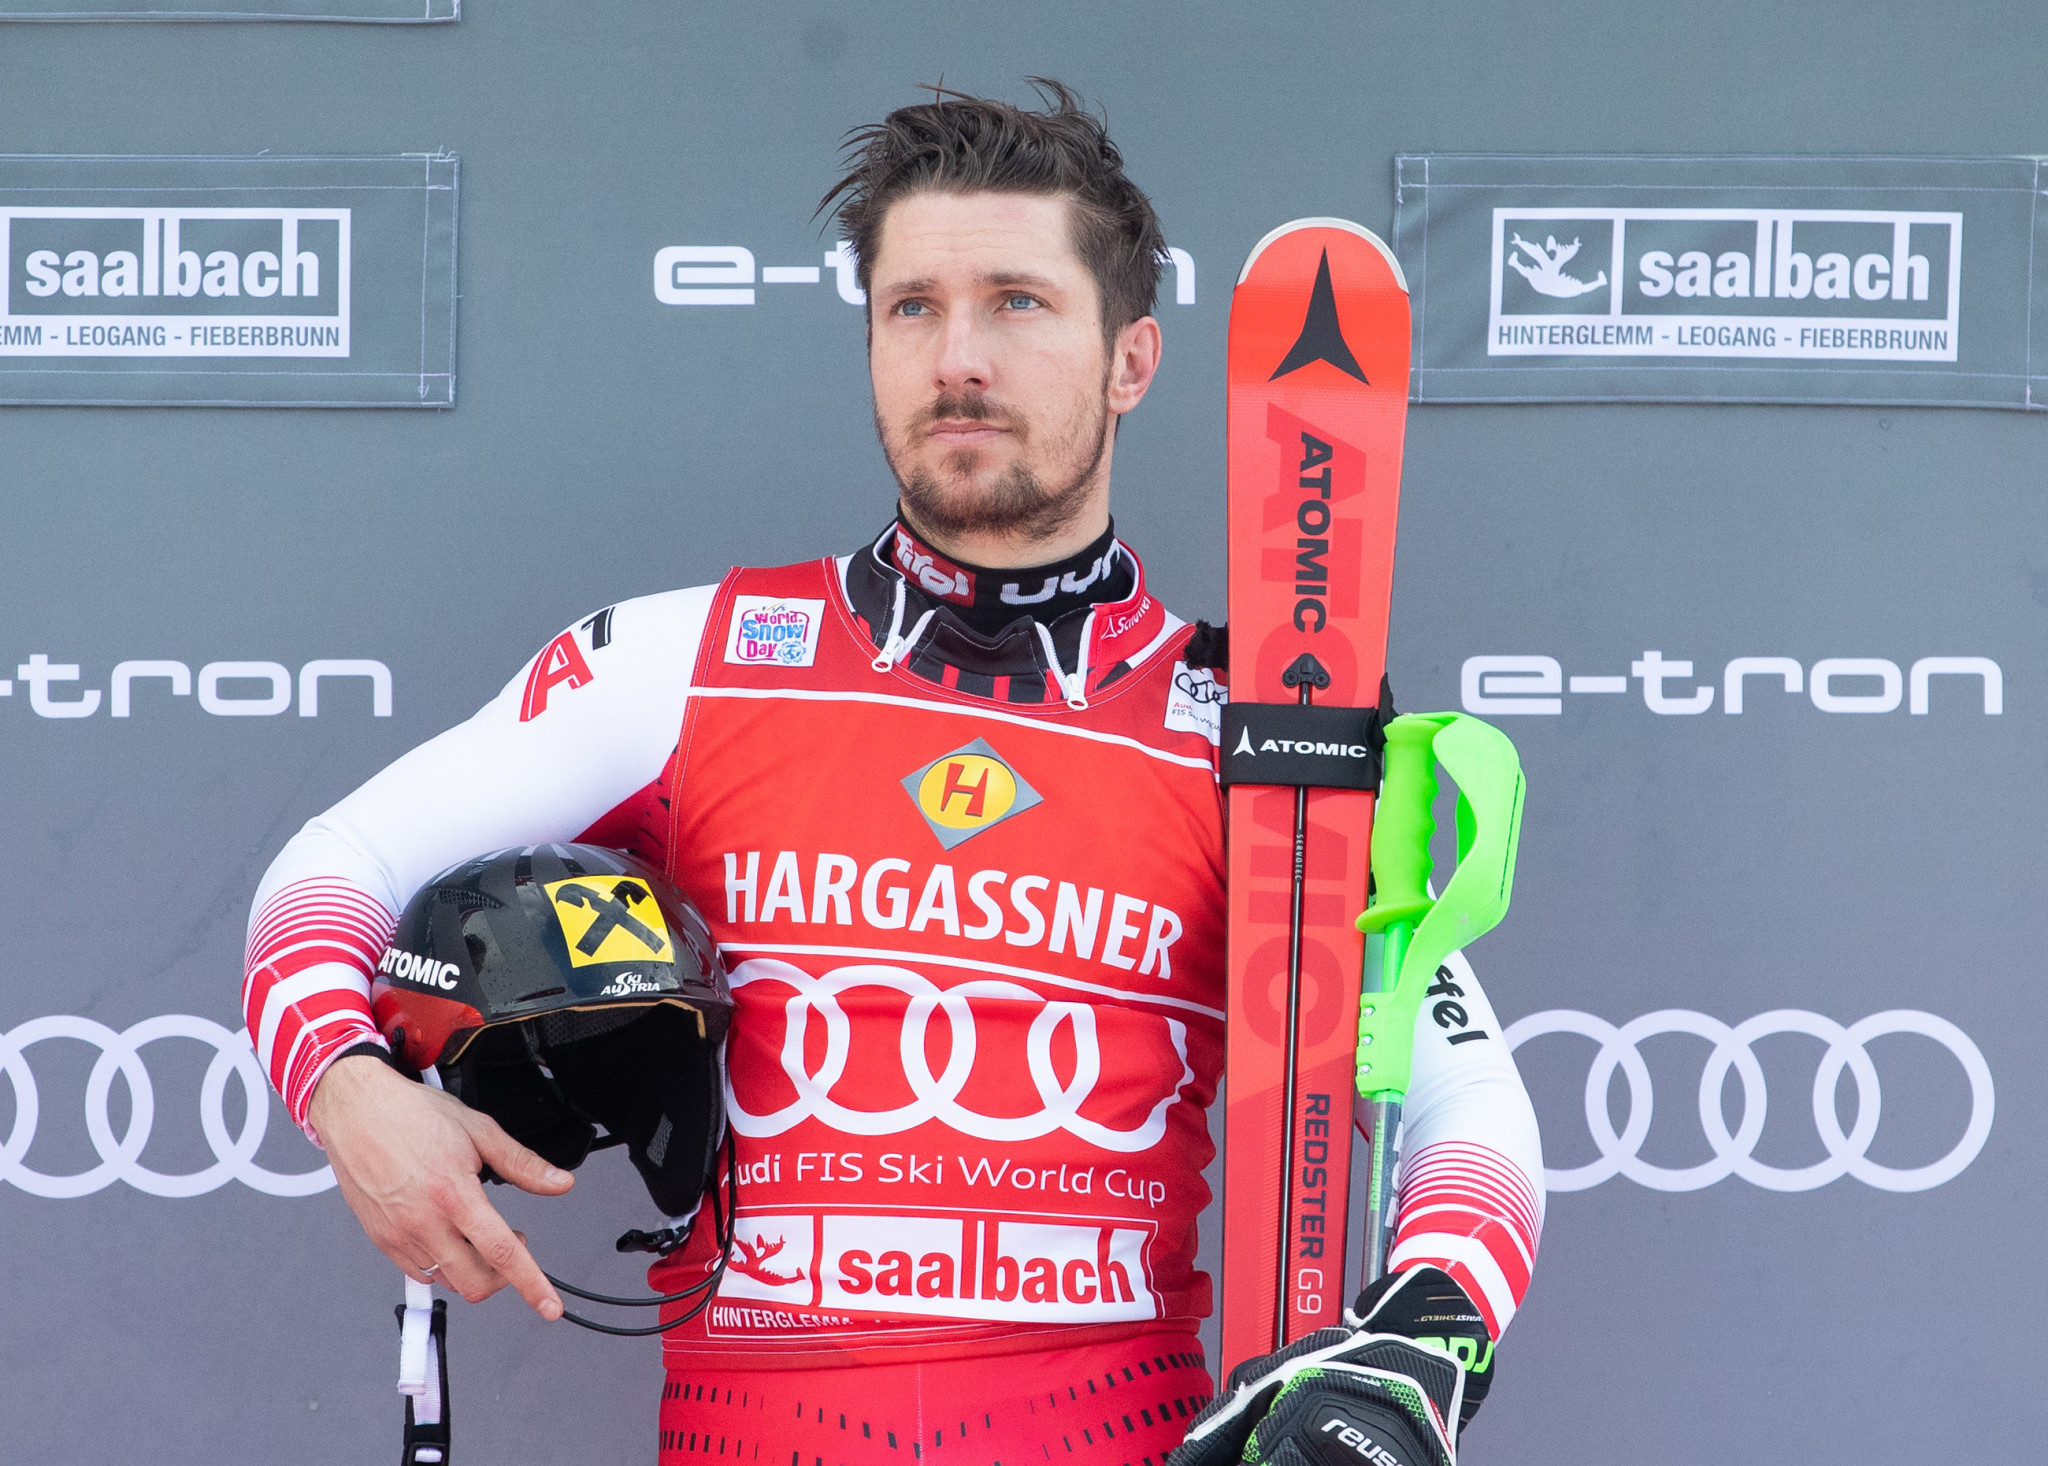 Hirscher wins slalom event at FIS Alpine Skiing World Cup to